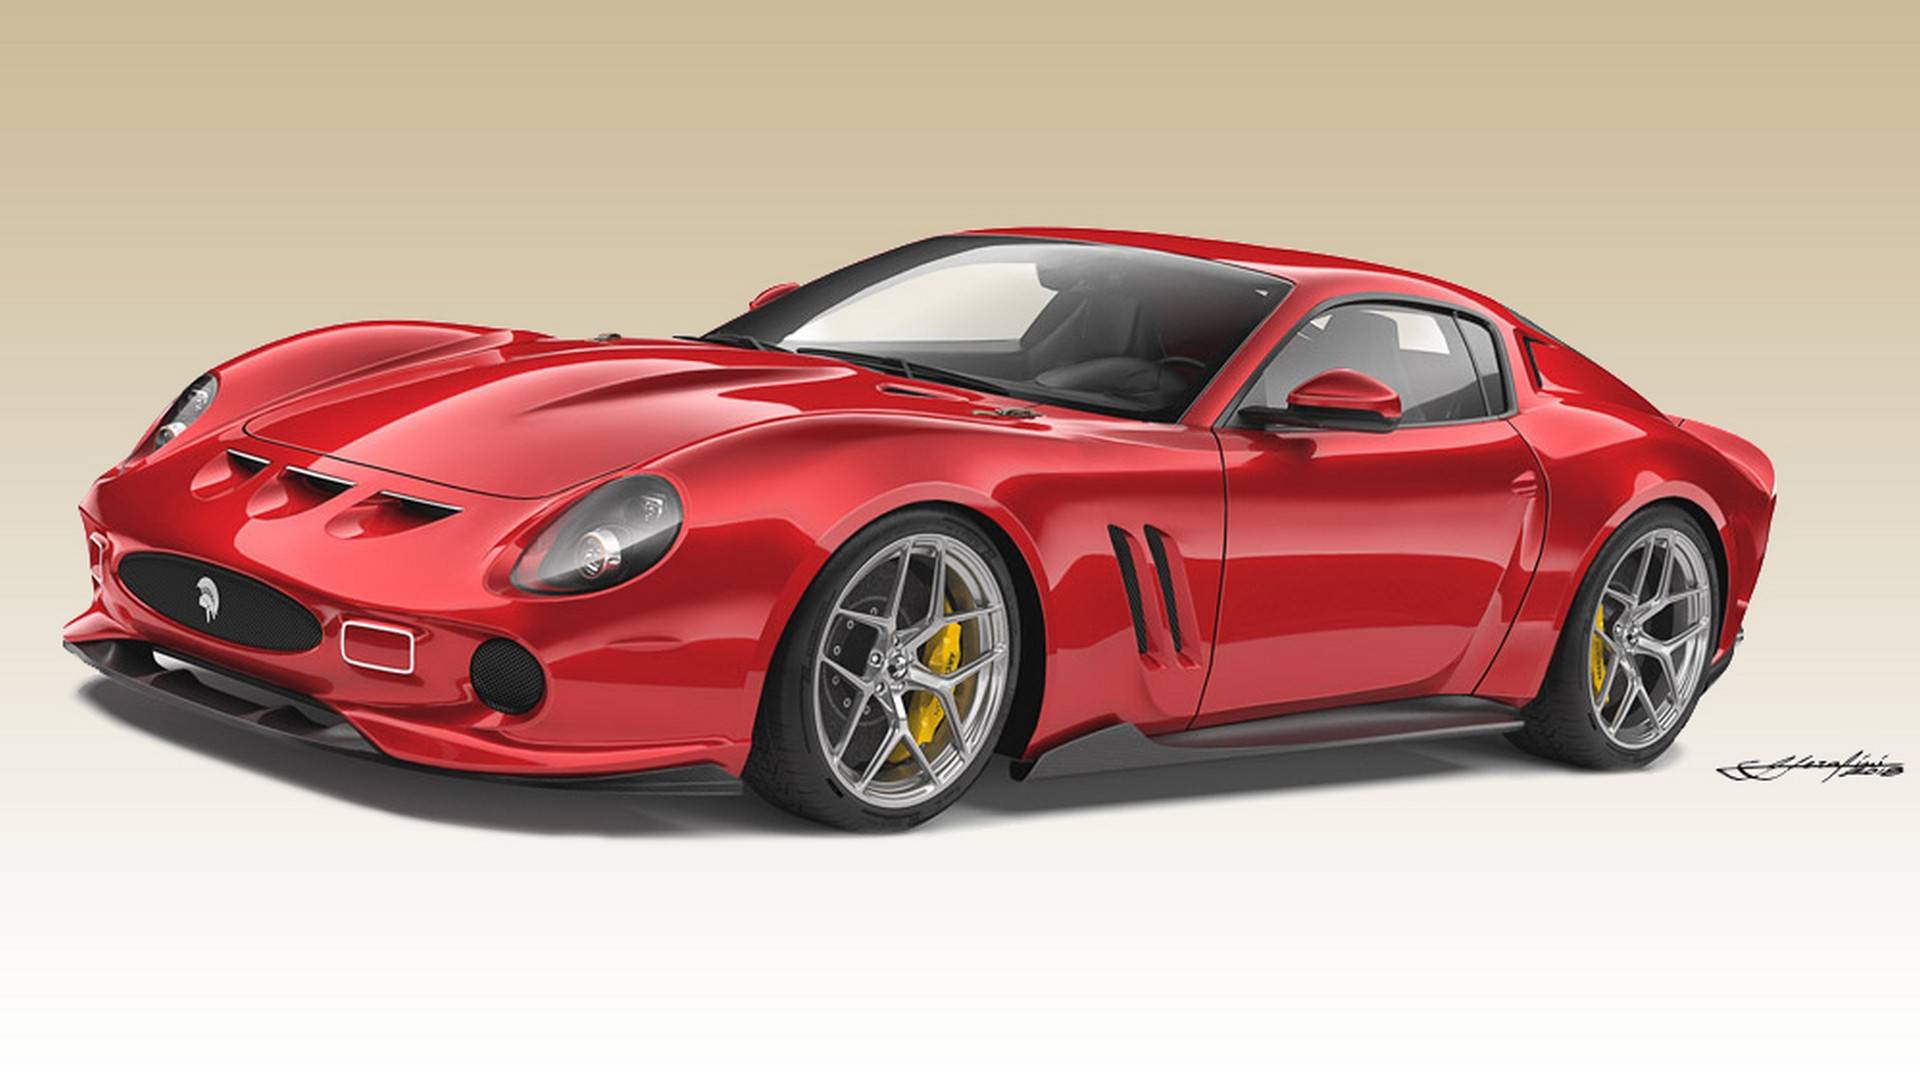 ferrari-loses-trademark-for-the-shape-of-the-250-gto-after-ares-design-contest_2.jpg